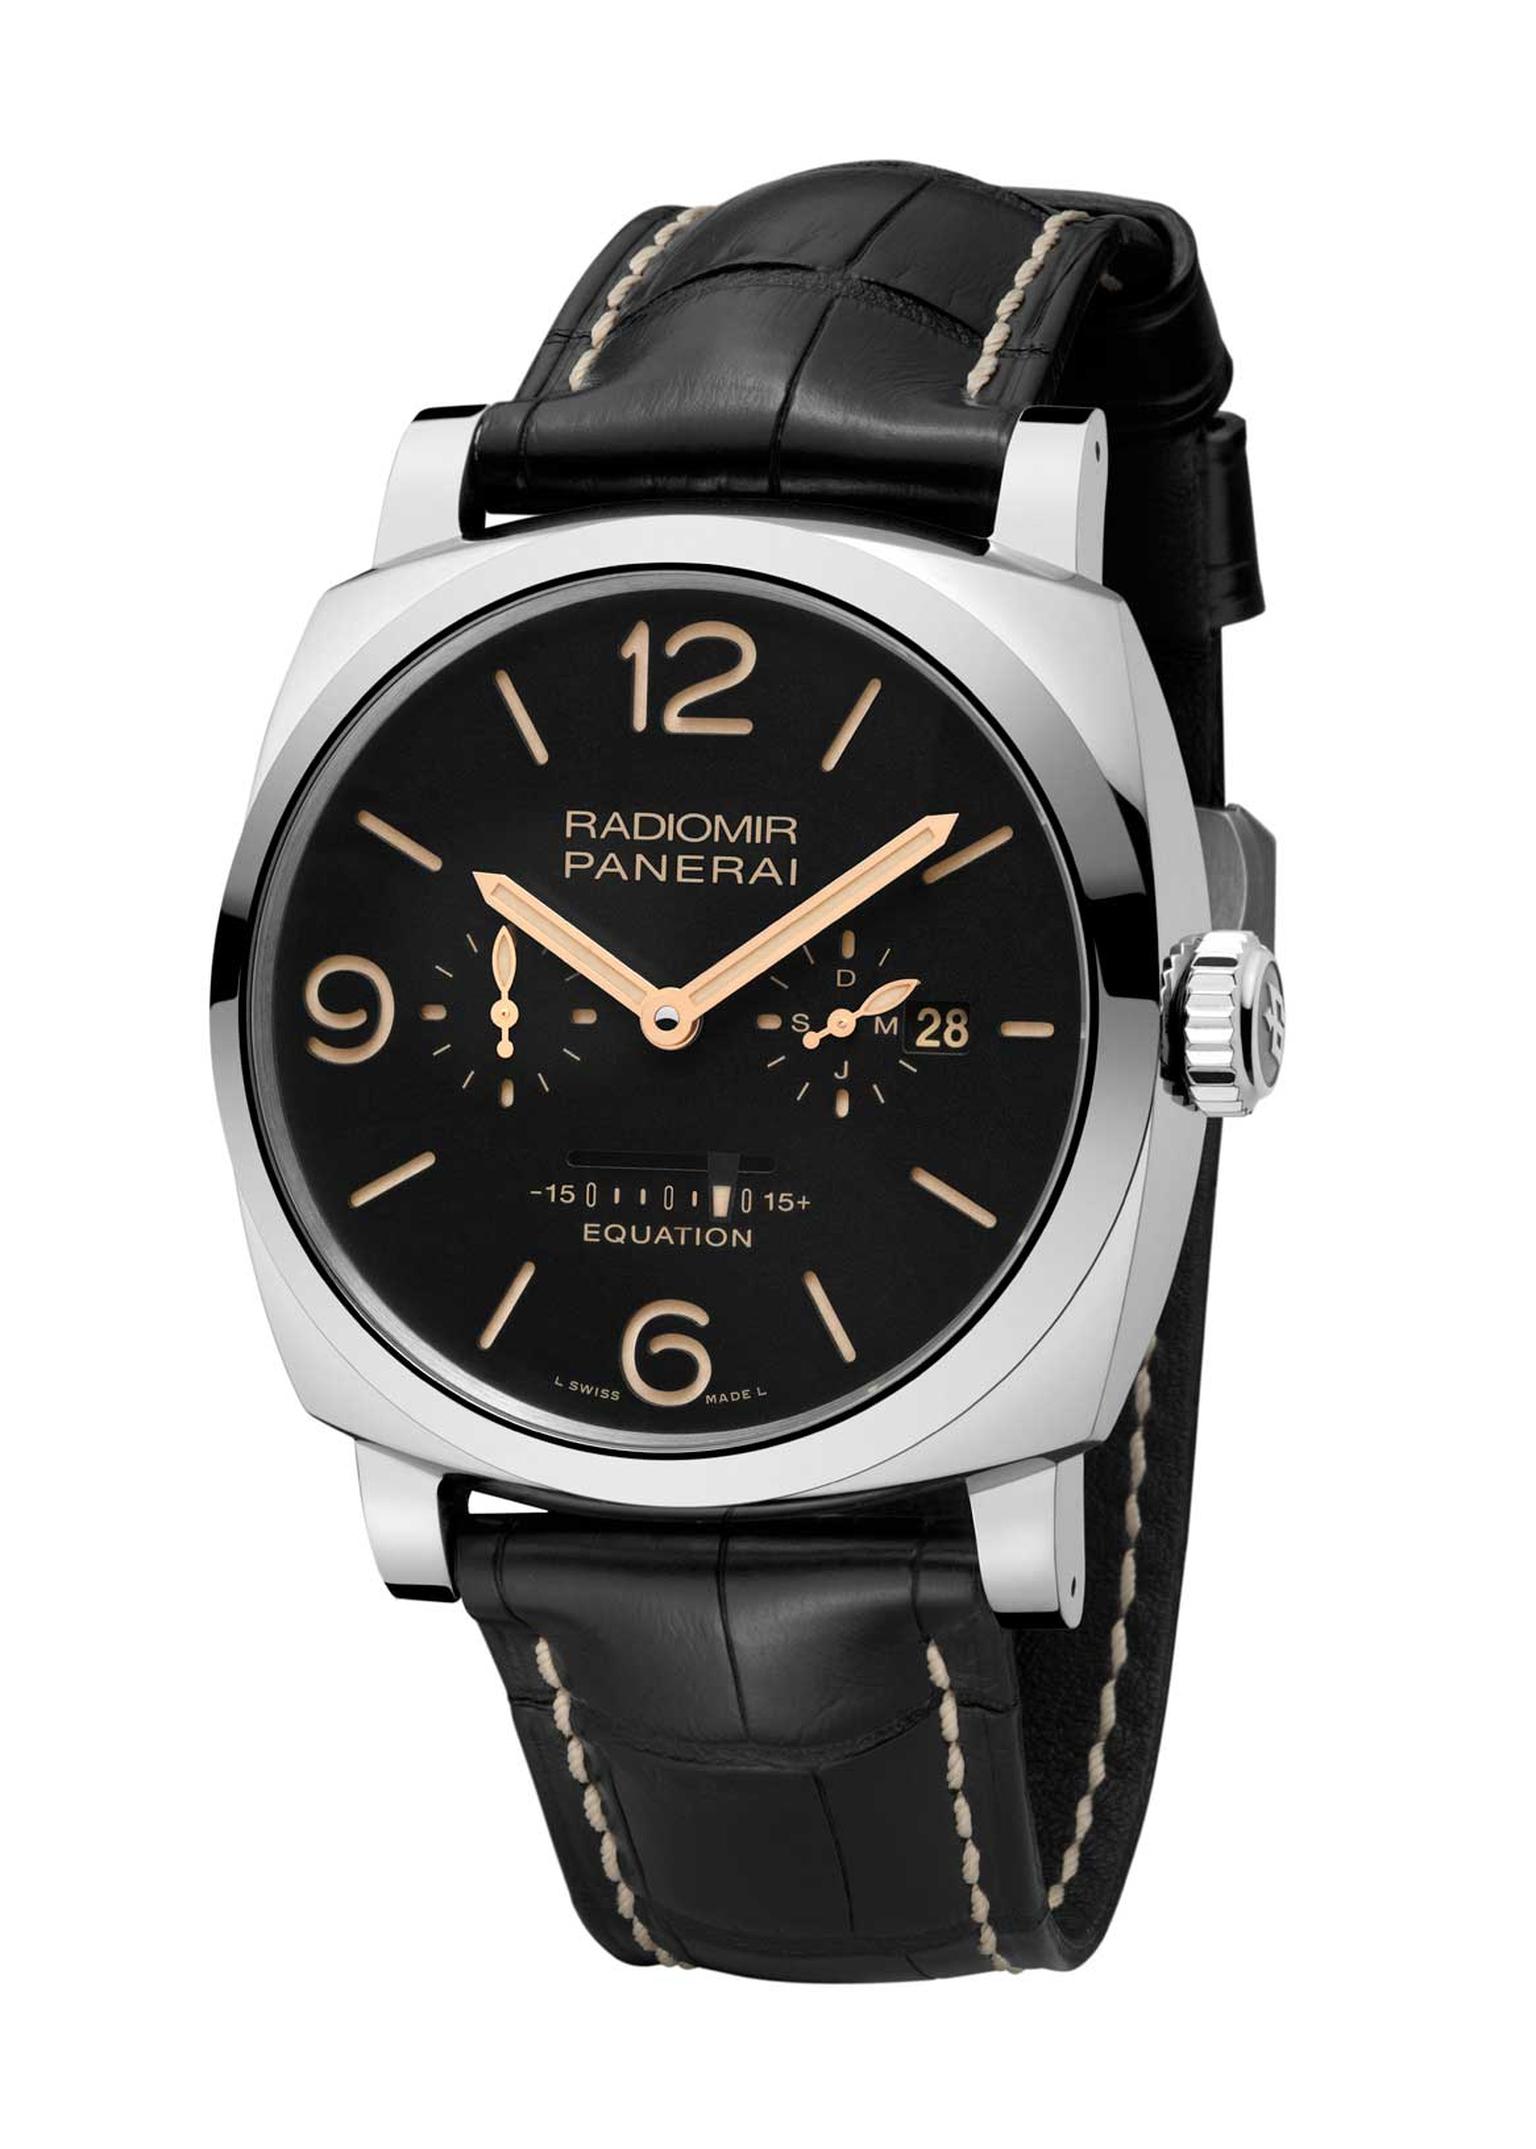 Retailed to the public since 1993, the Panerai Radiomir and Luminor models are so popular that they have their very own fan club of Paneristi aficionados. Pictured here, the new Panerai Radiomir 1940 Equation of Time 8-days in a 48mm stainless steel case.